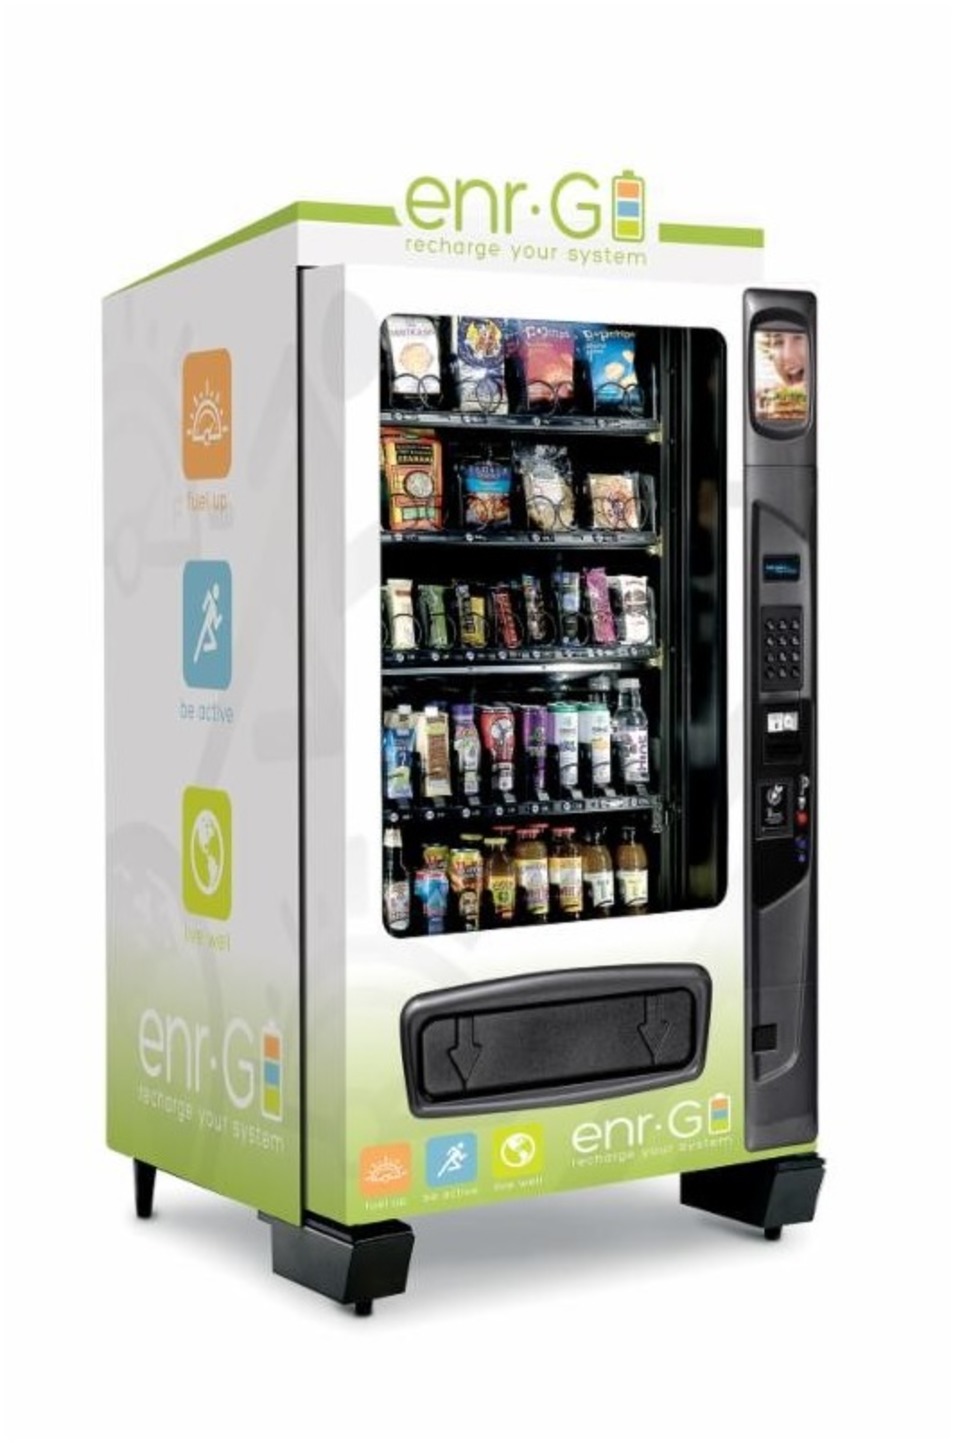 Canteen Introduces Wellness-Focused Vending Solution enr.G